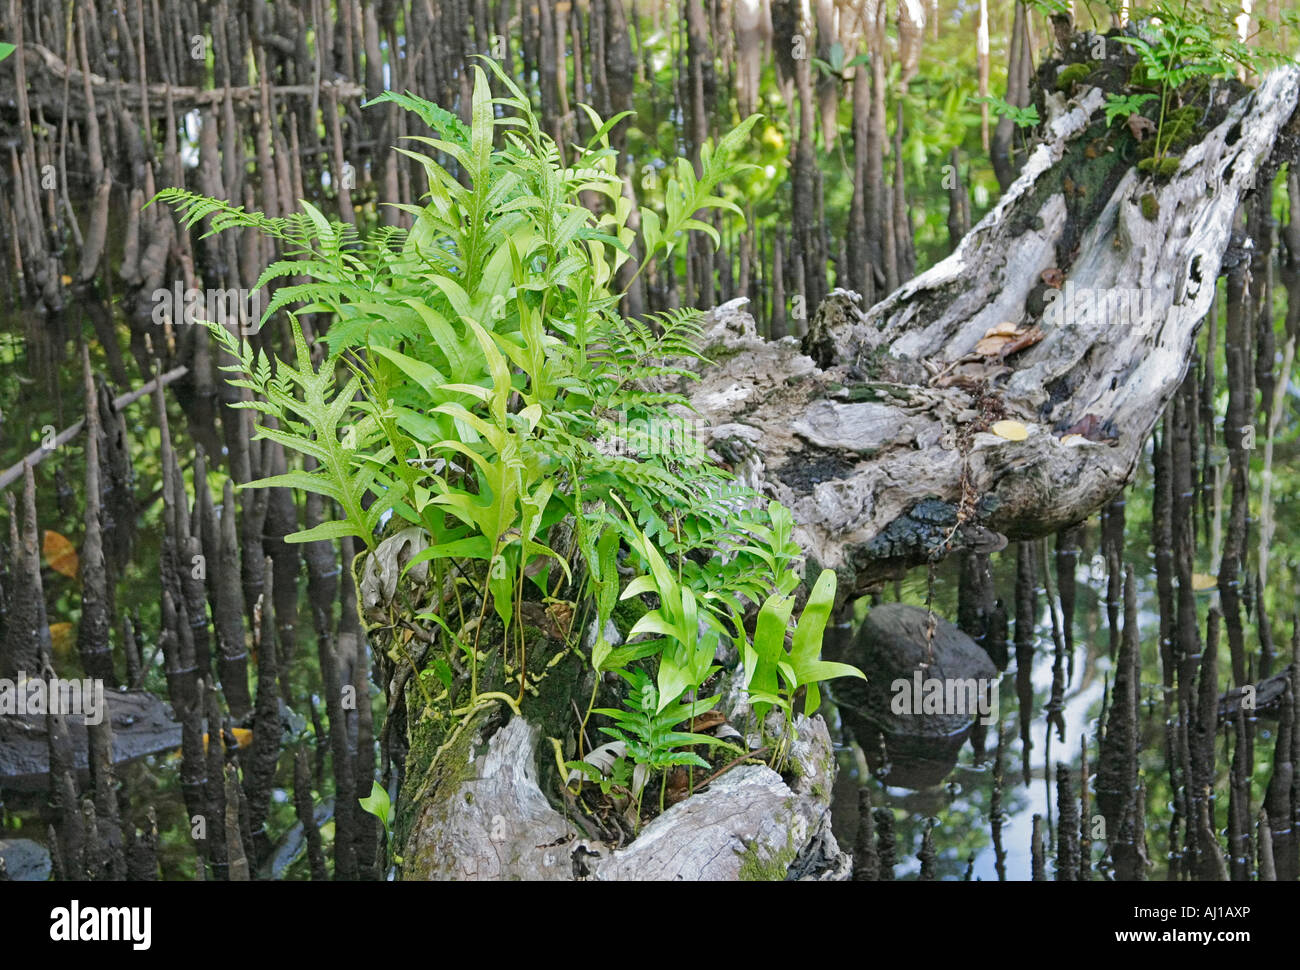 Mangrove trees covered with ferns with air roots showing at low tide in Kosrae Federated States of Micronesia FSM Stock Photo